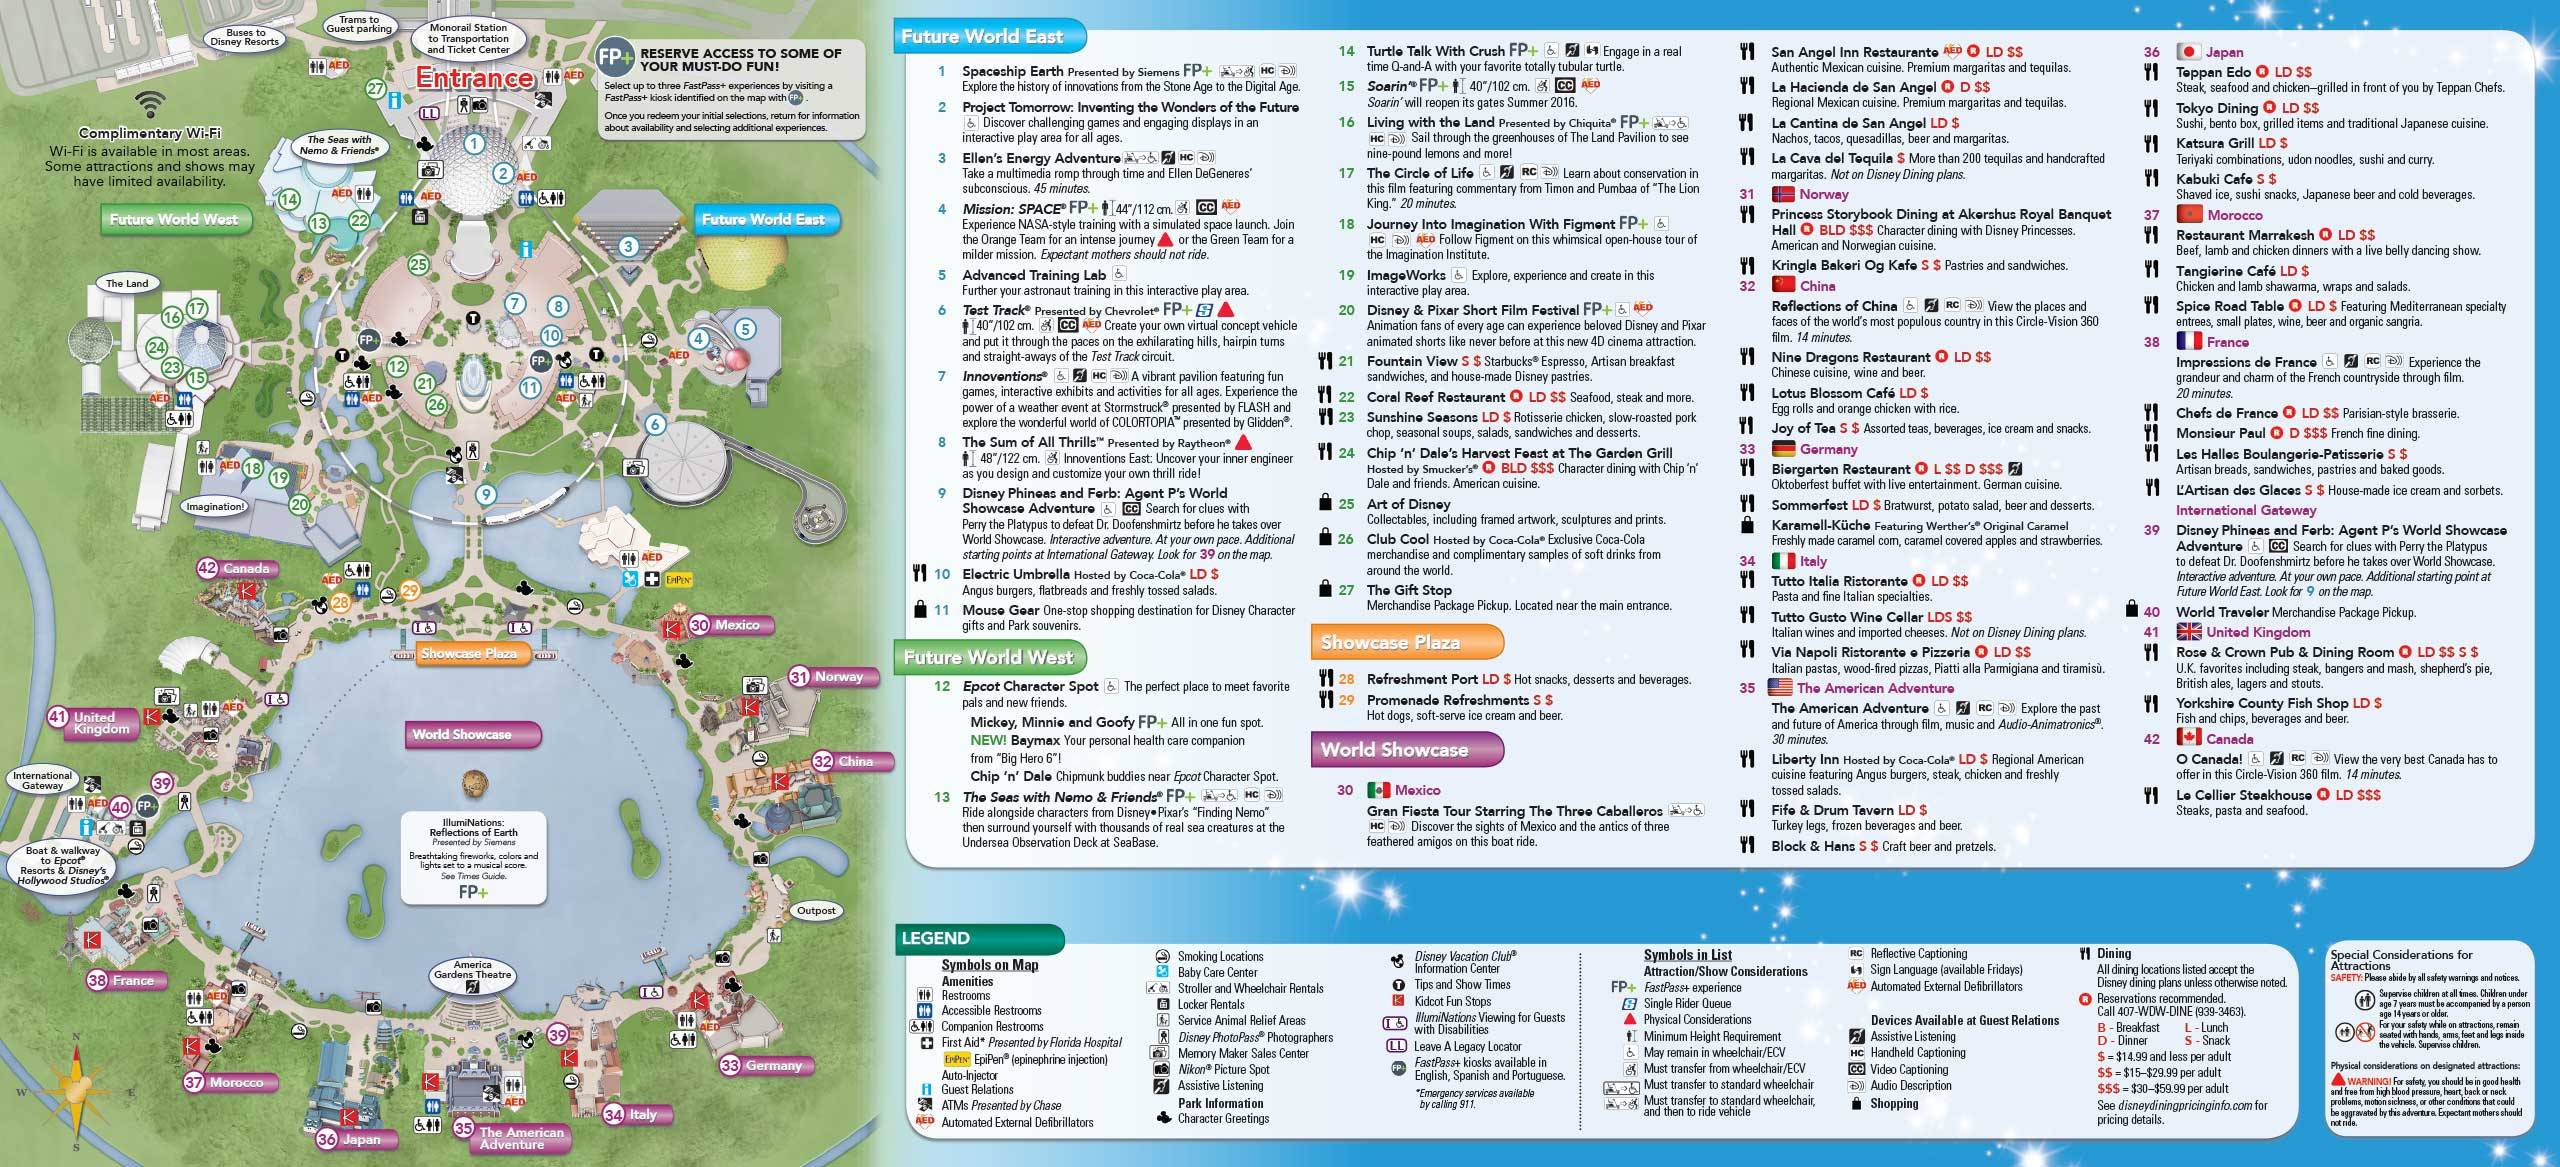 Epcot Guide Map January 2016 - Back